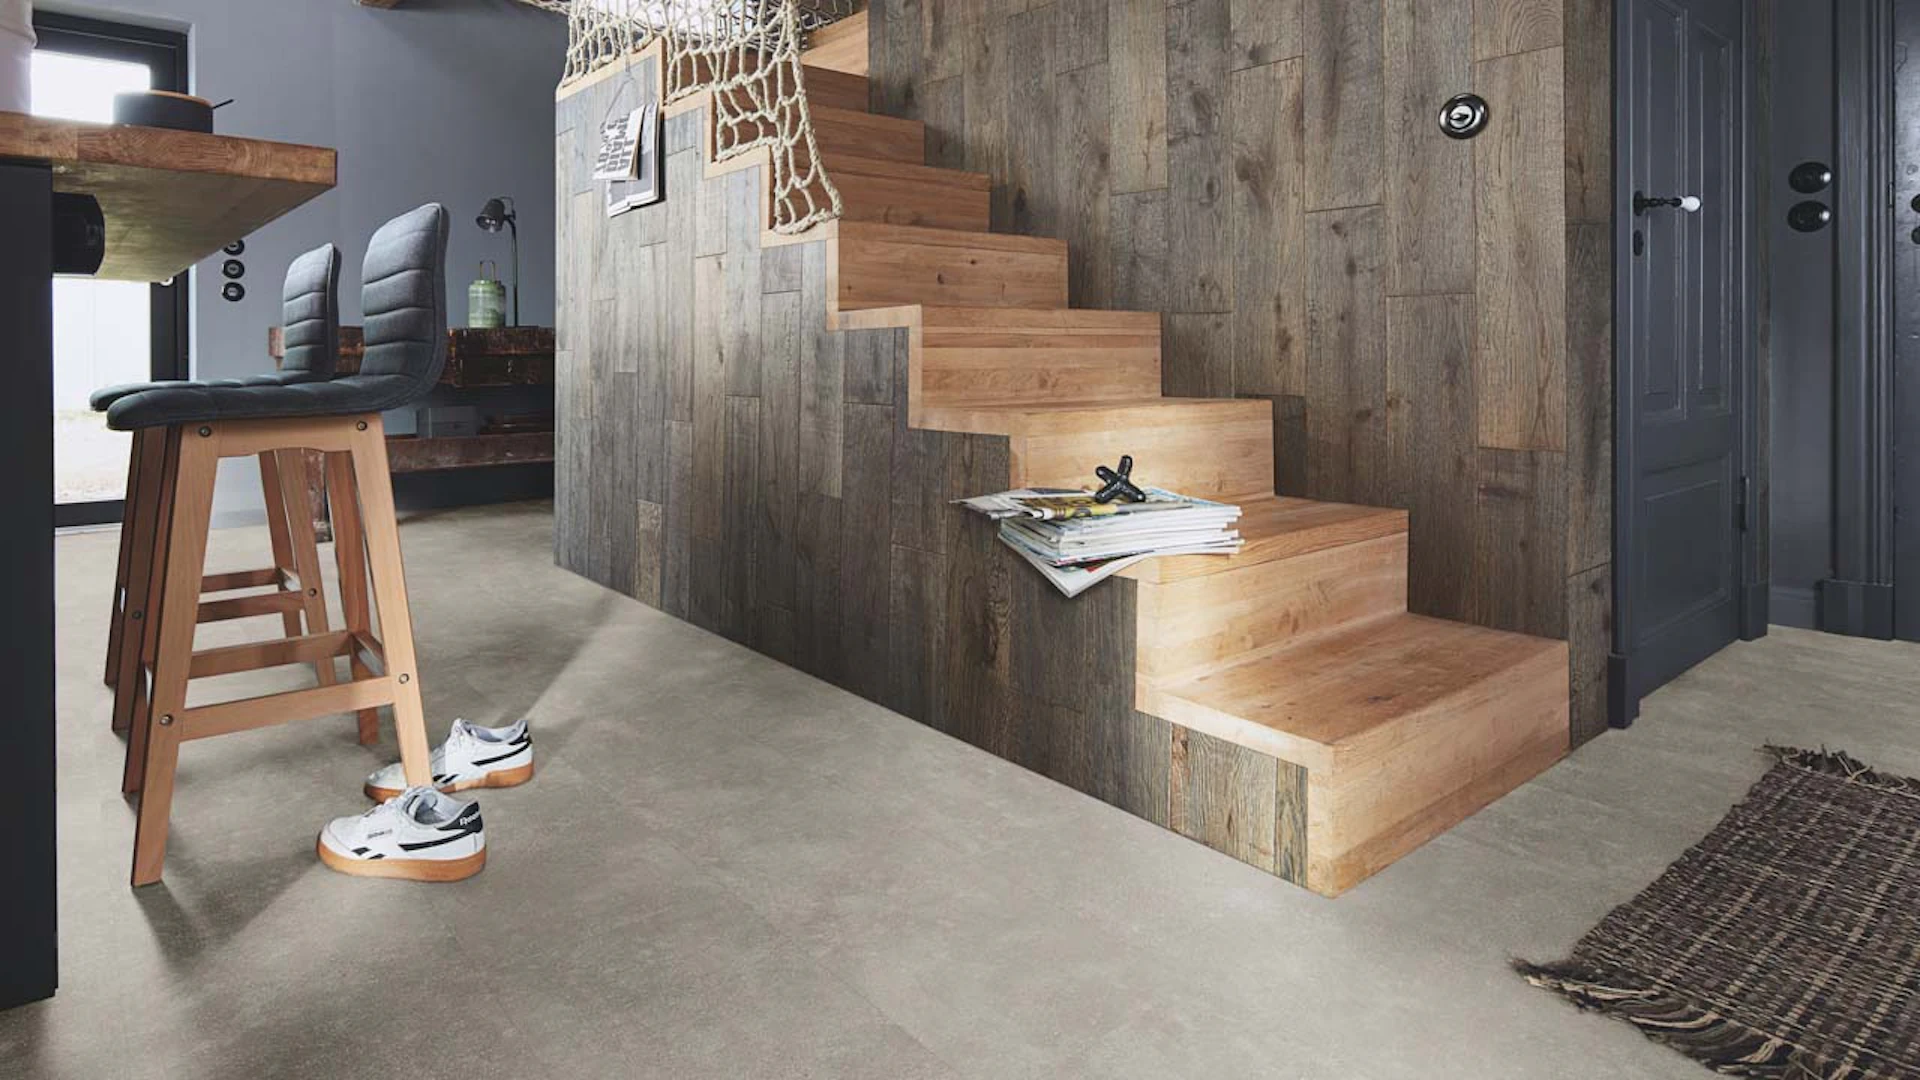 MEISTER Stratifié - MeisterDesign LB 150 Mineral stone 7137 | Made in Germany (600003-0857398-07137)